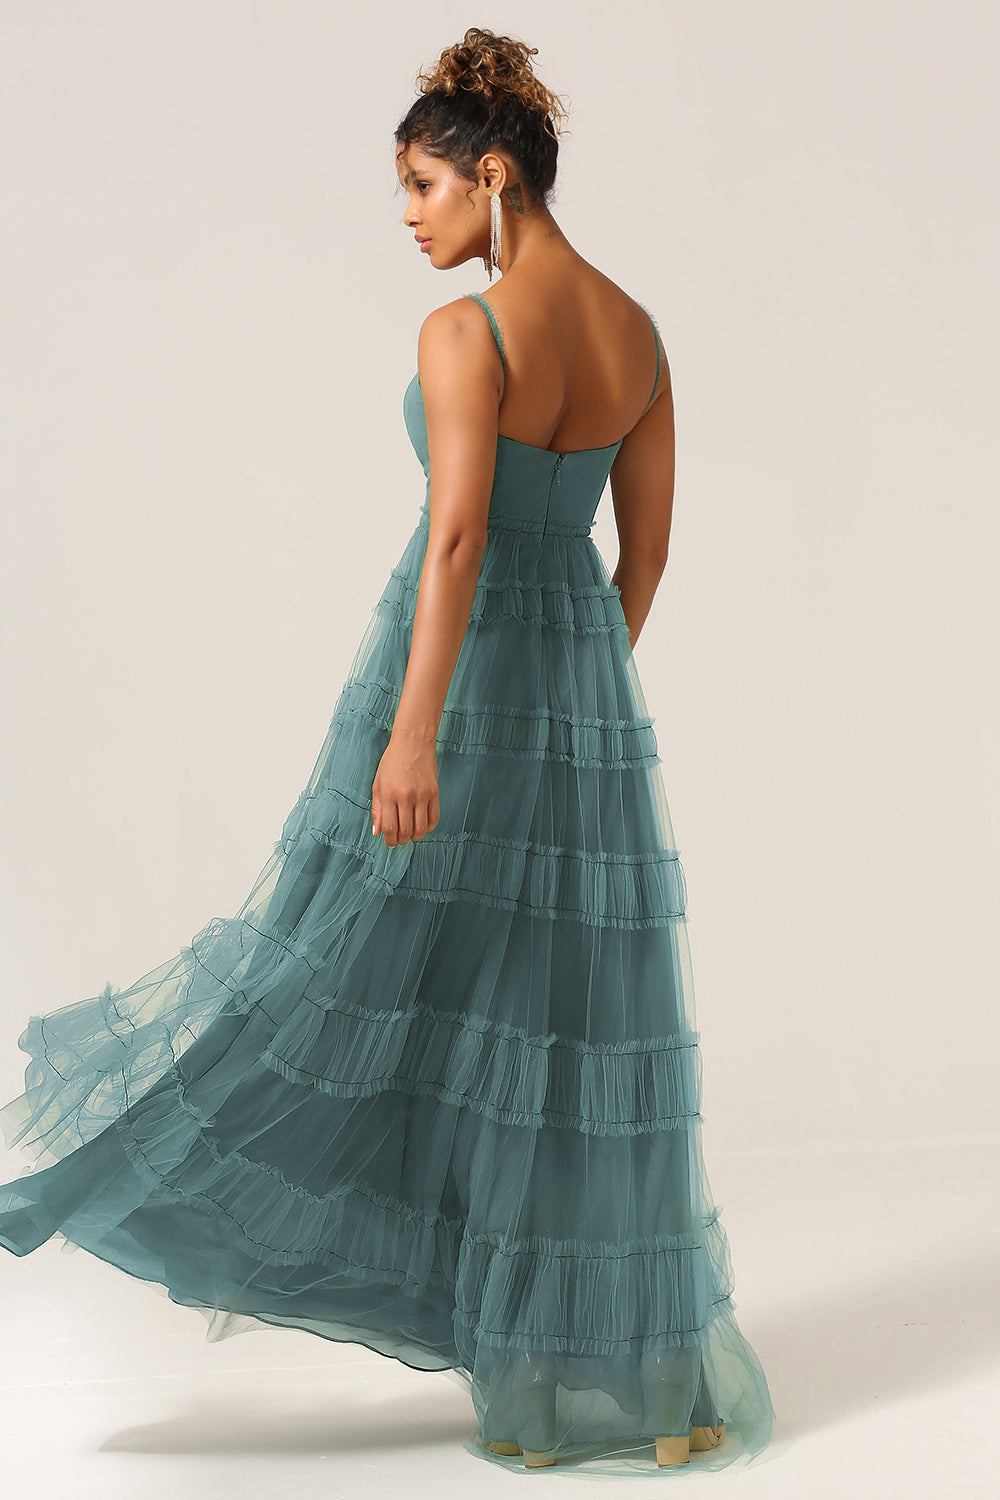 Peacock A Line Spaghetti Straps Tiered Tulle Long Bridesmaid Dress